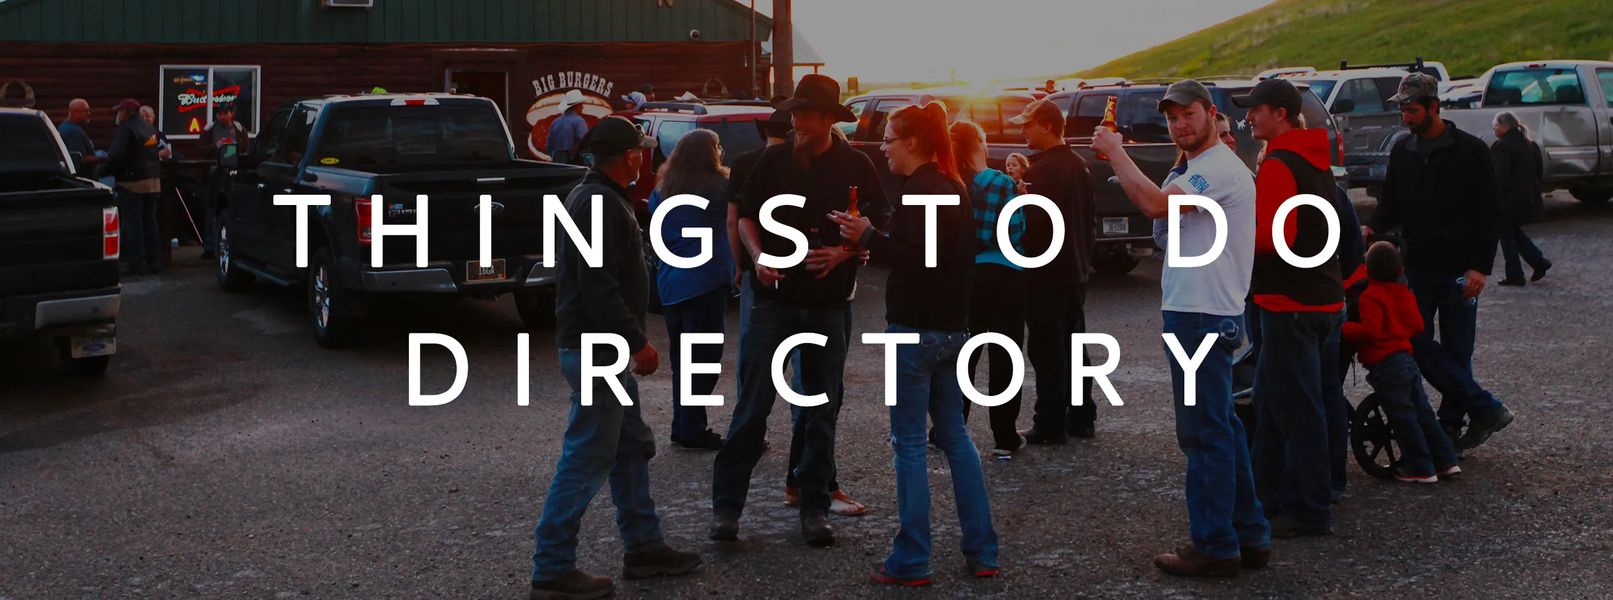 Things to Do in Lewistown and Central Montana Directory